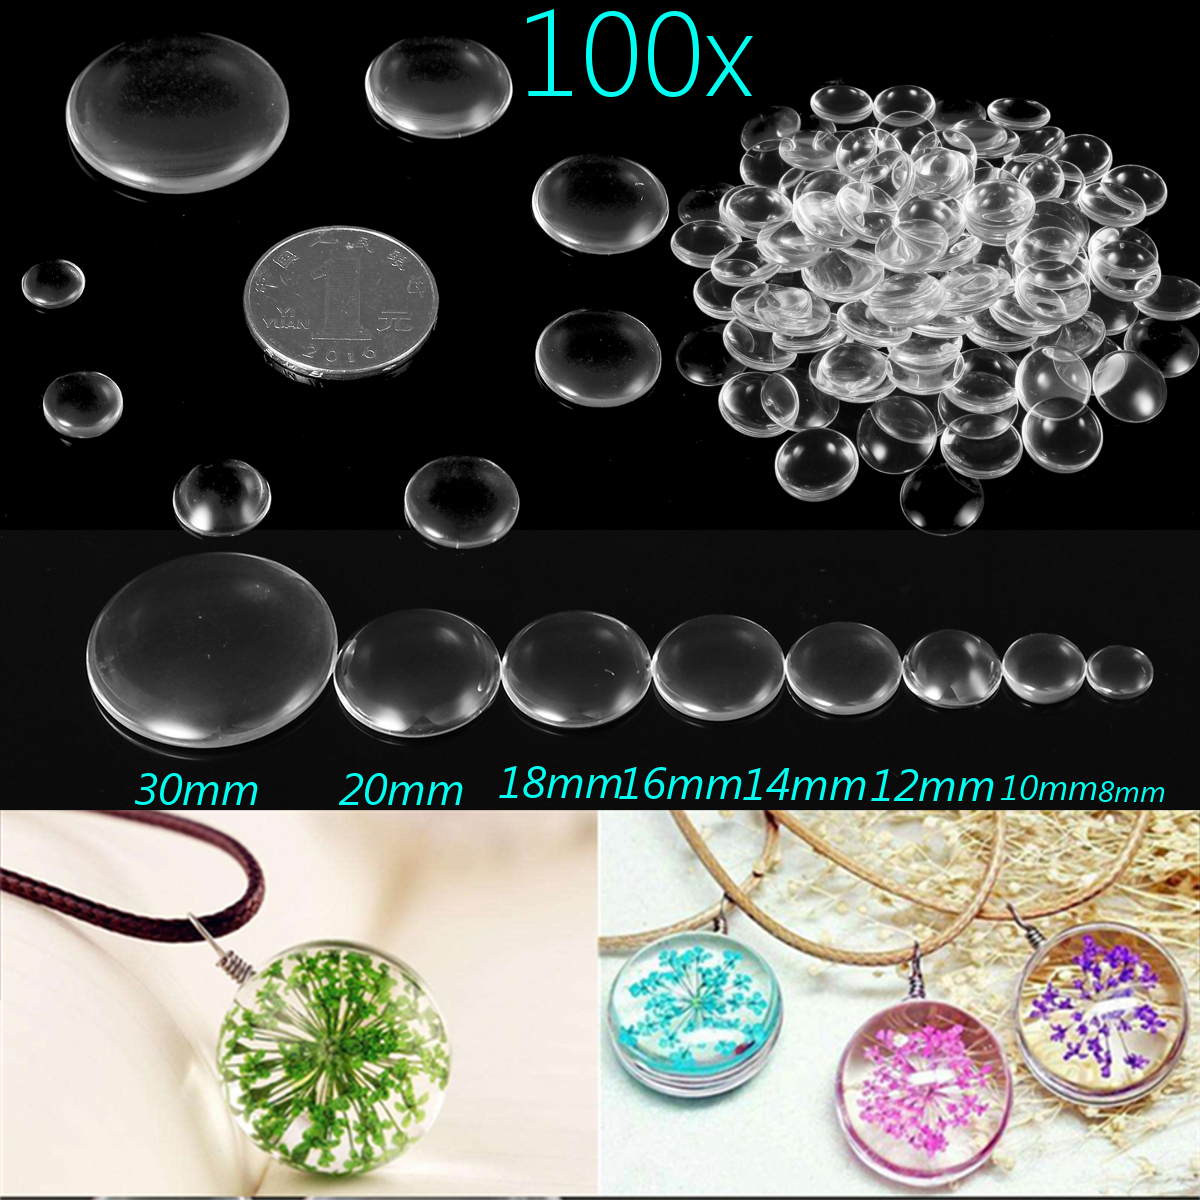 100Pcs-Round-Clear-Glass-Dome-Cabochon-Cameo-Flat-Back-Crystal-Magnify-Base-Cover-DIY-1229011-4